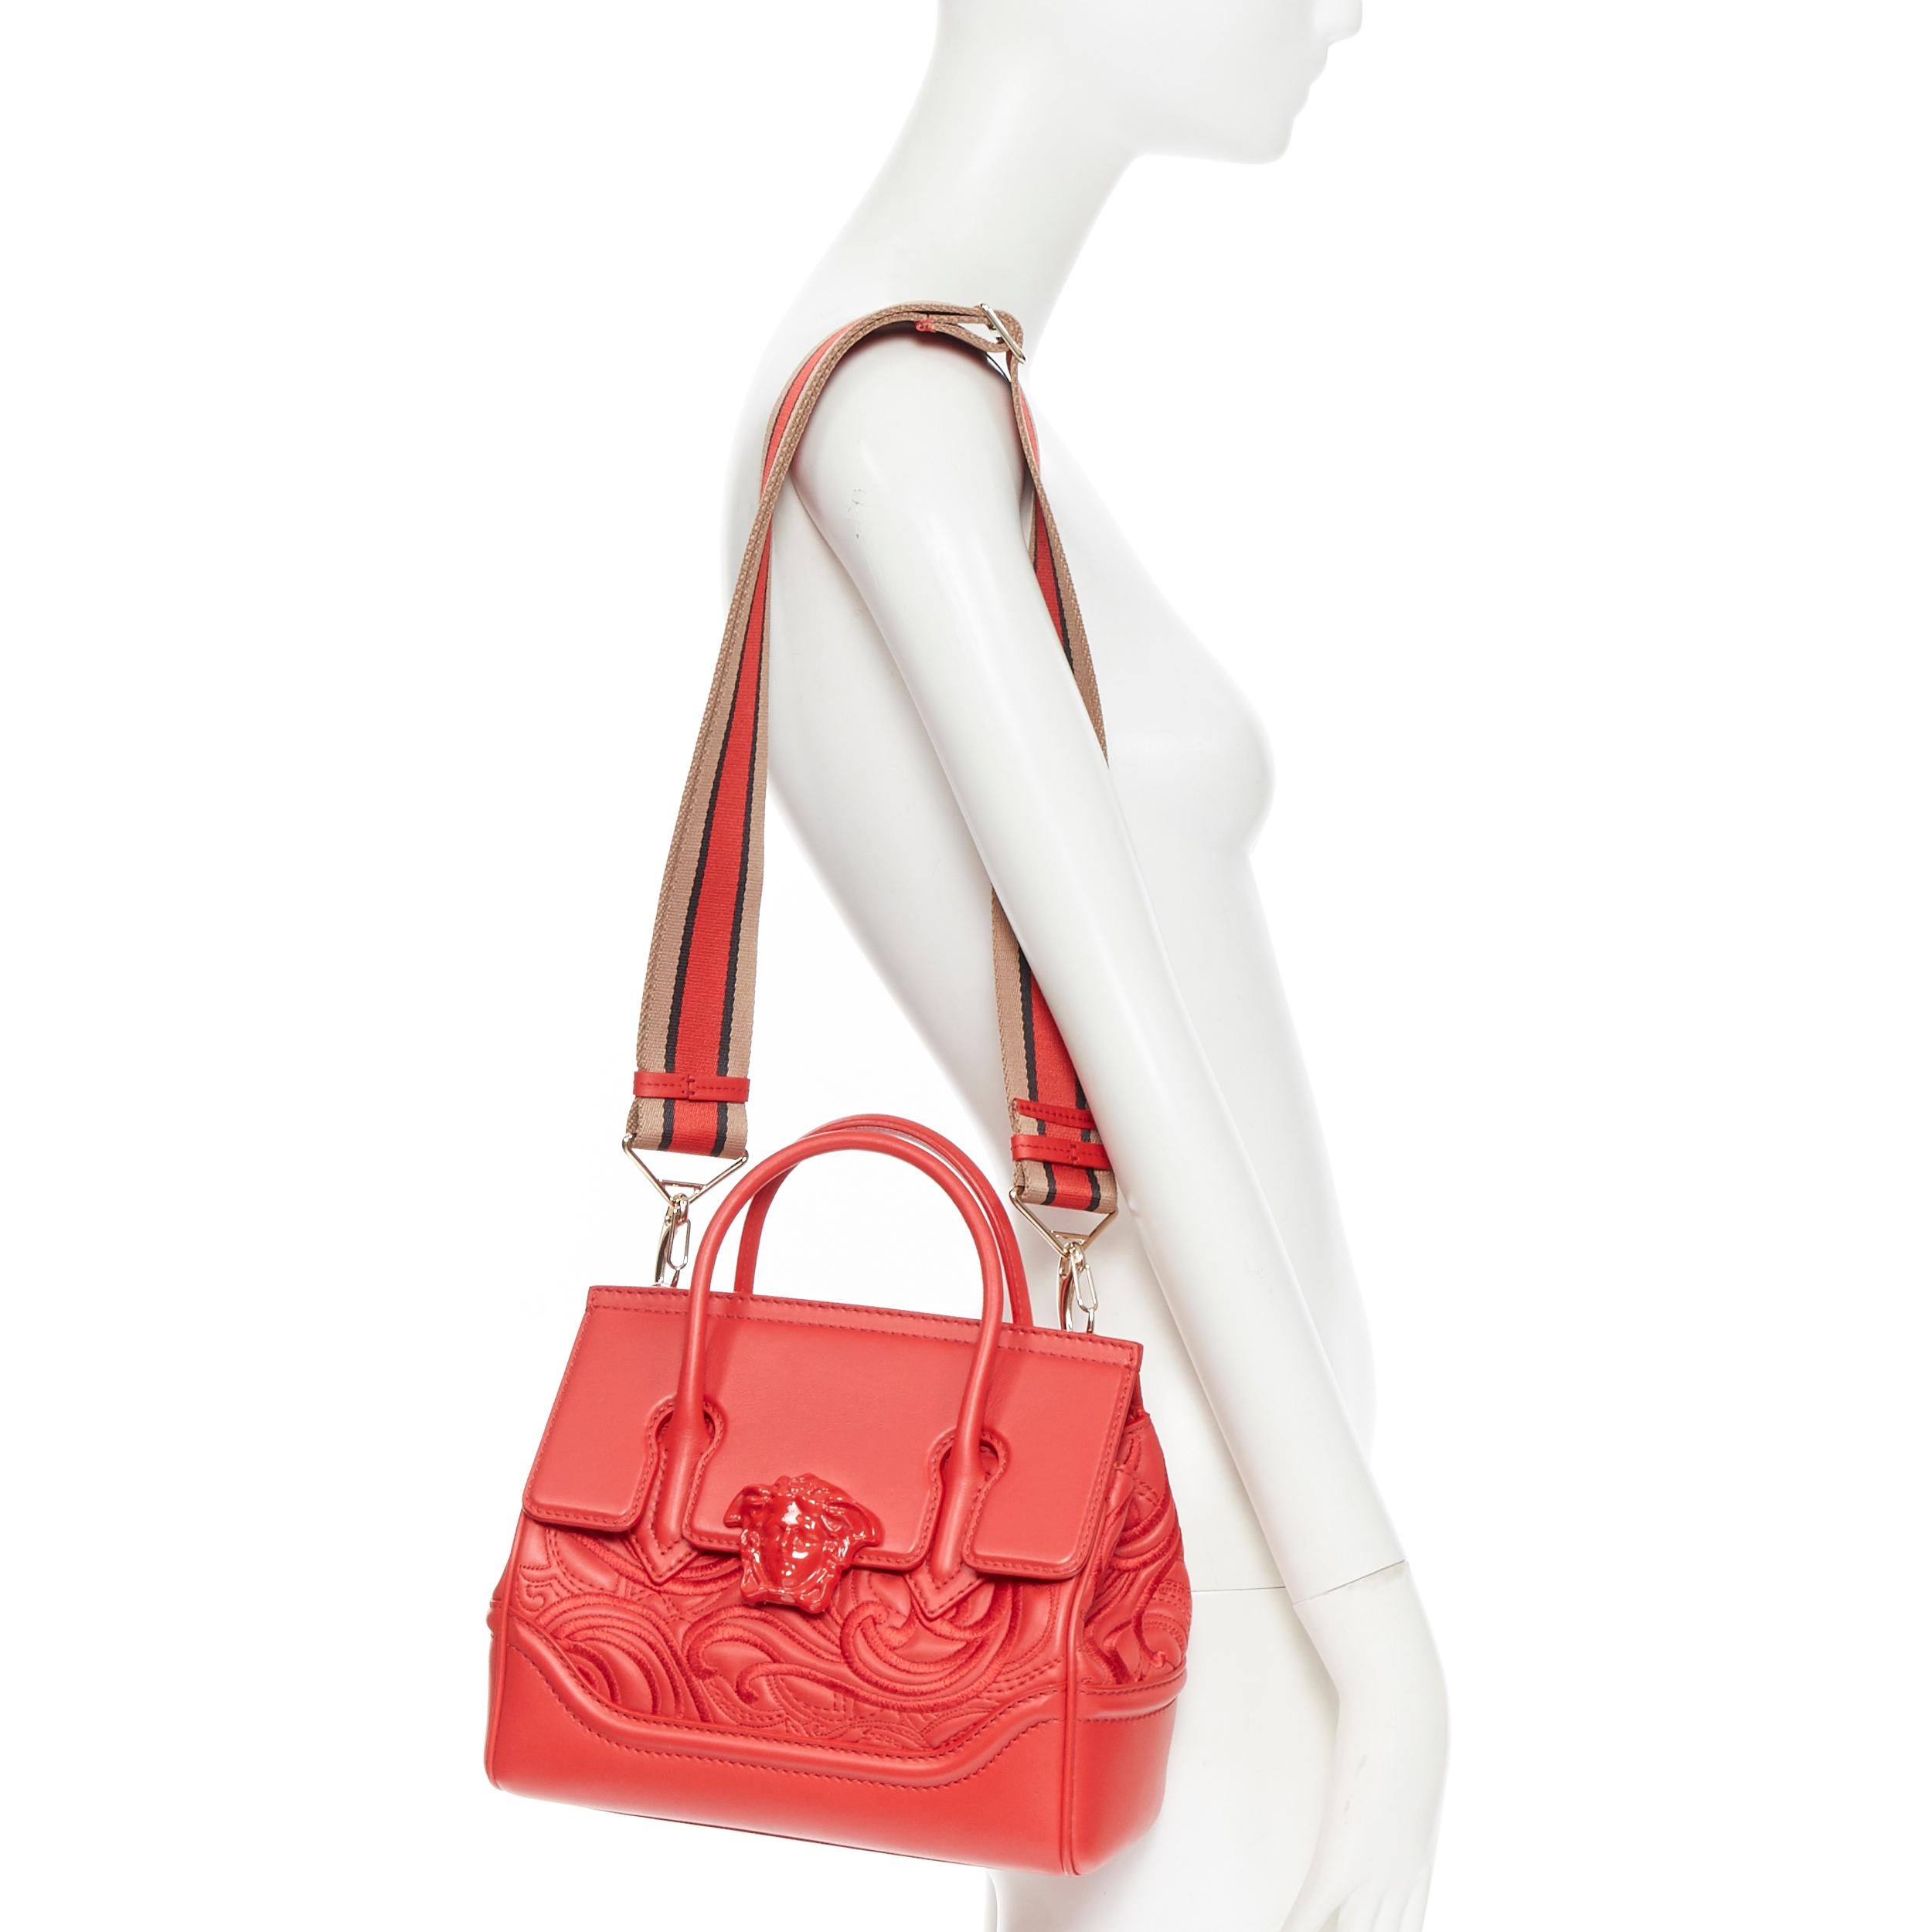 new VERSACE Palazzo Empire Small Baroque Embroidery red Medusa head satchel bag 
Brand: Versace
Designer: Donatella Versace
Collection: 2019
Model Name / Style: Palazzo Empire
Material: Leather
Color: Red
Pattern: Floral
Closure: Clasp
Lining